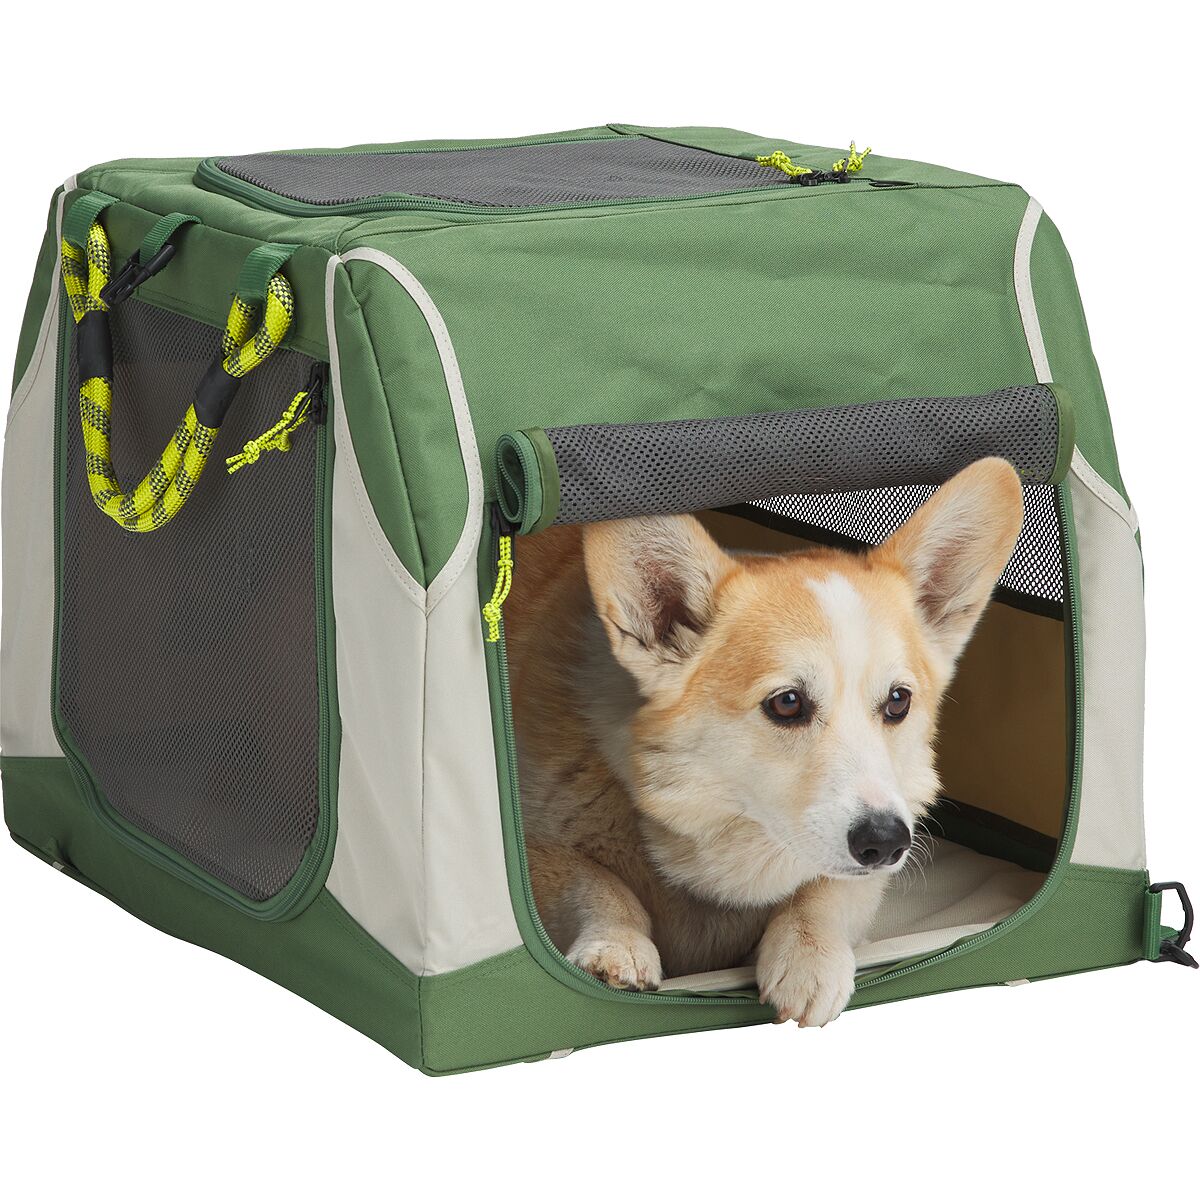 Backcountry x Petco The Foldable Dog Travel Crate